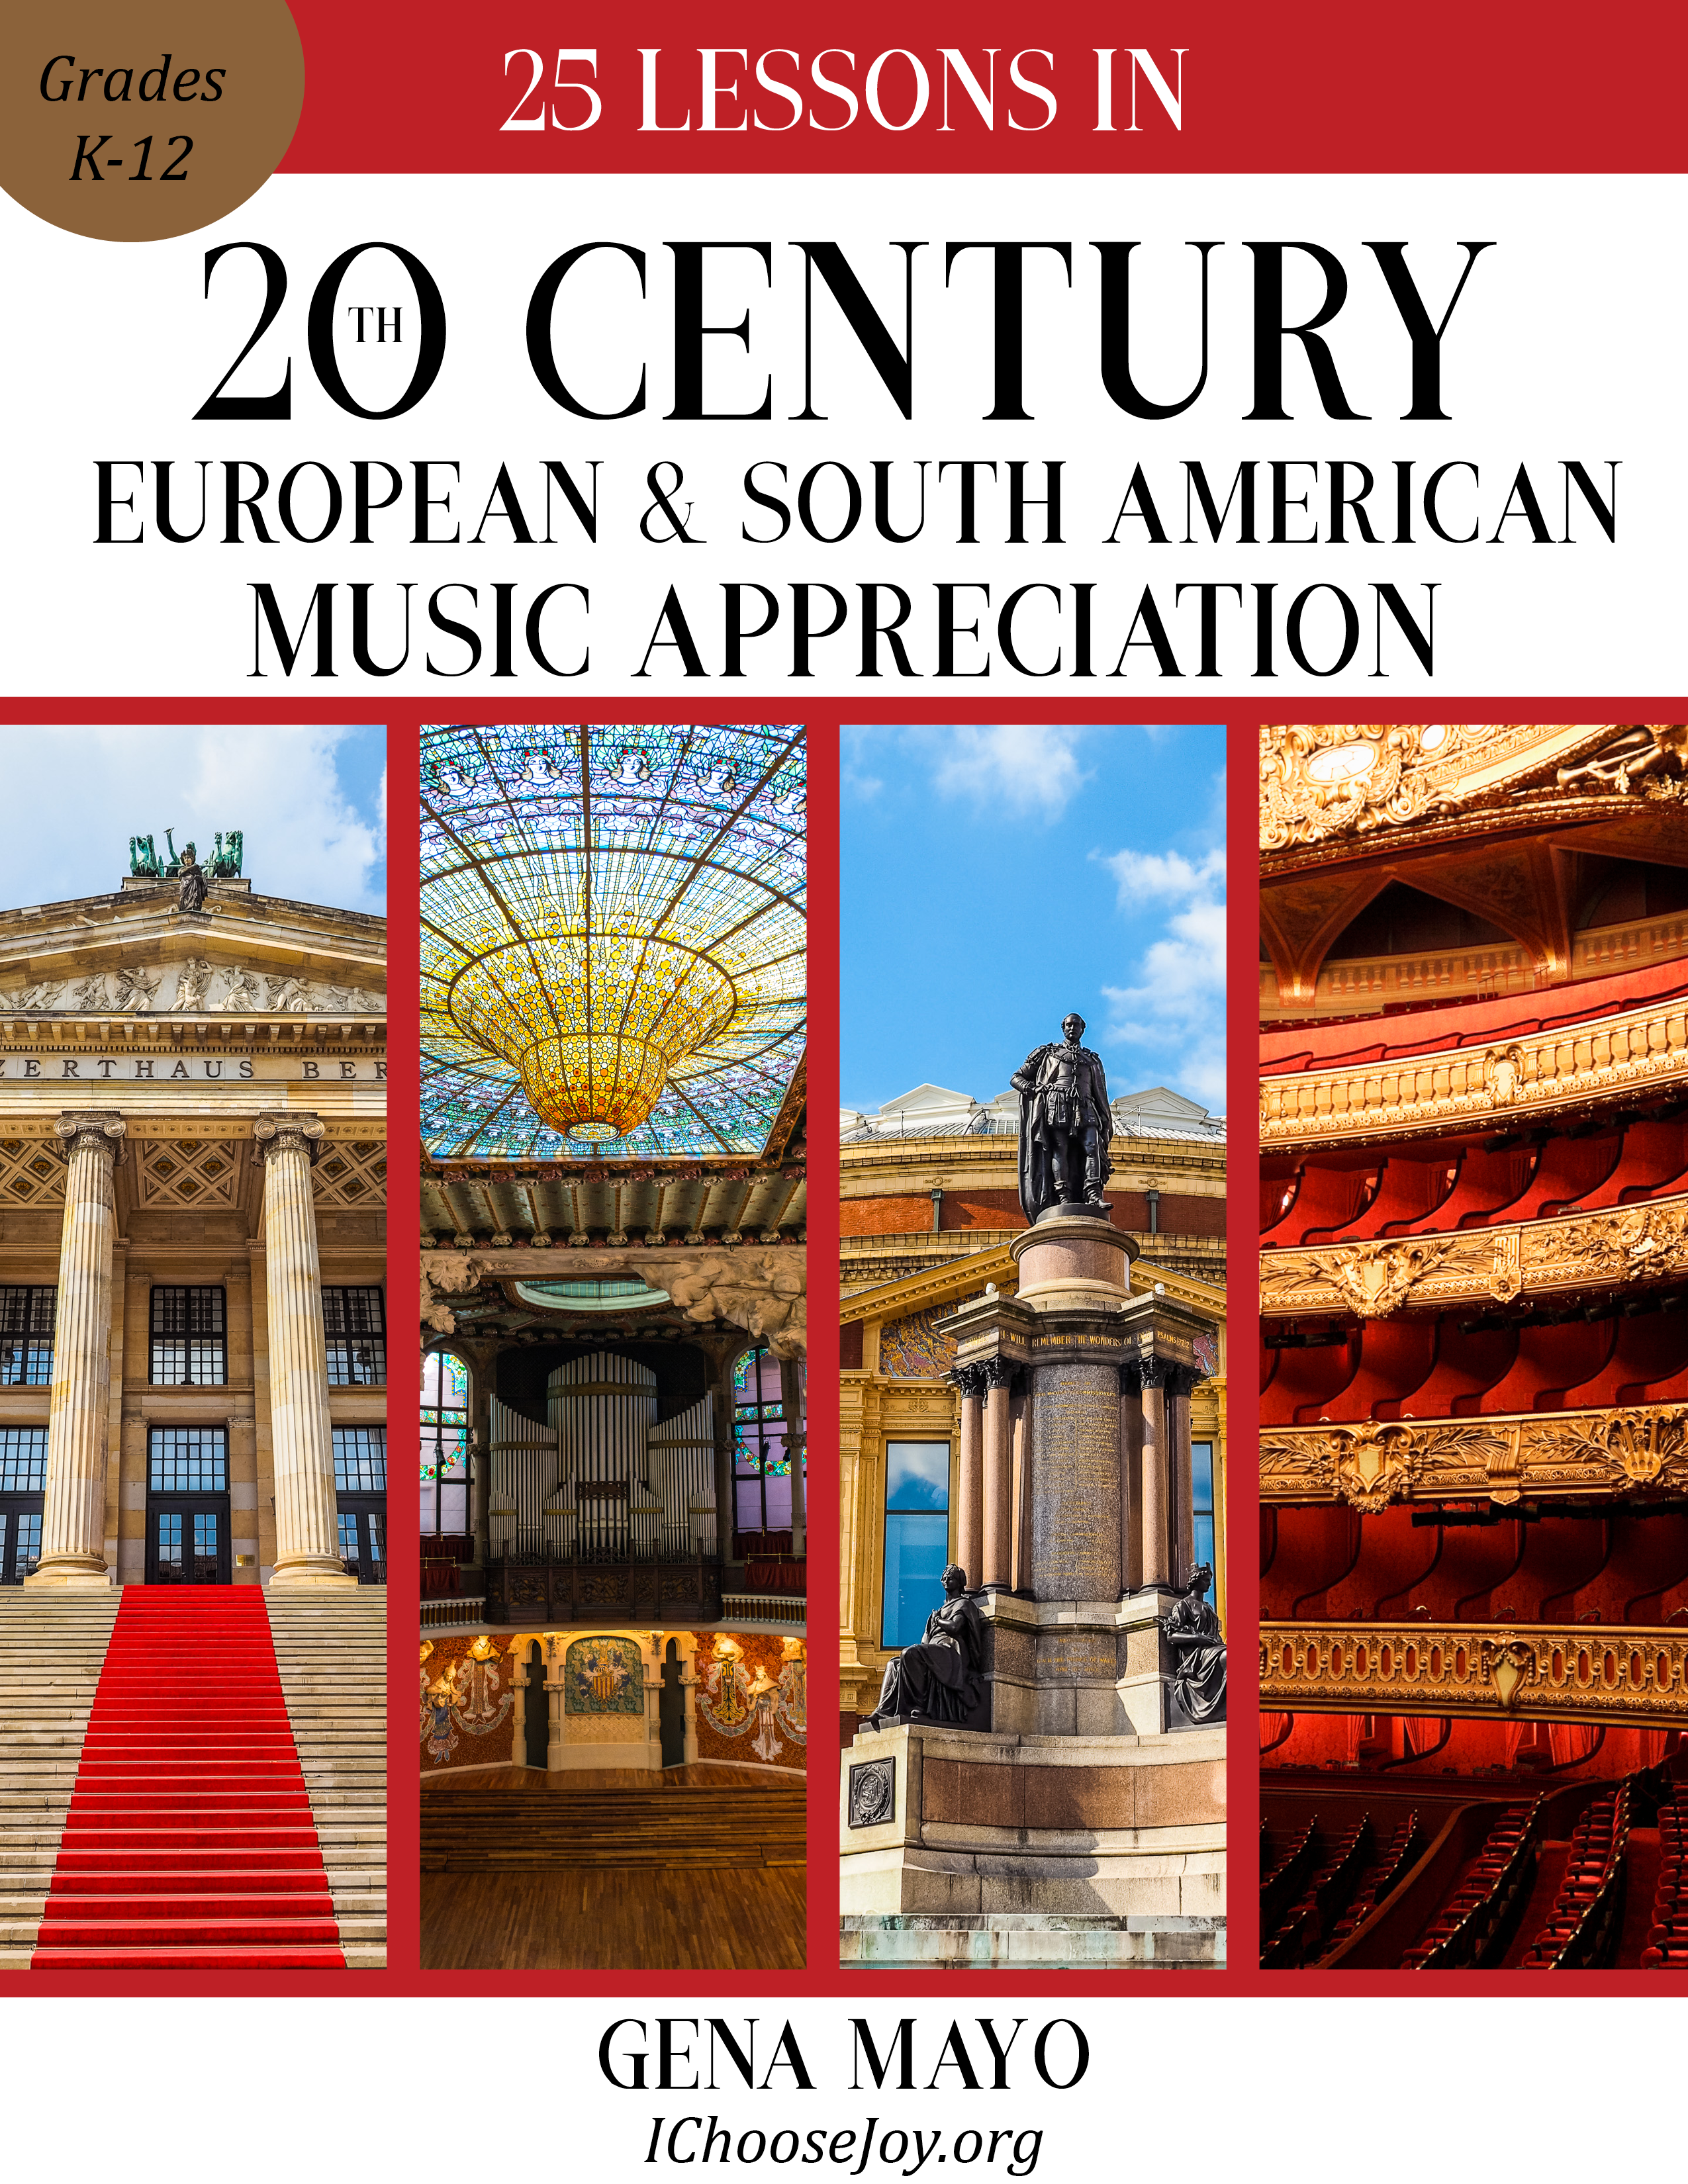 25 Lessons in 20th Century European & South American Music Appreciation